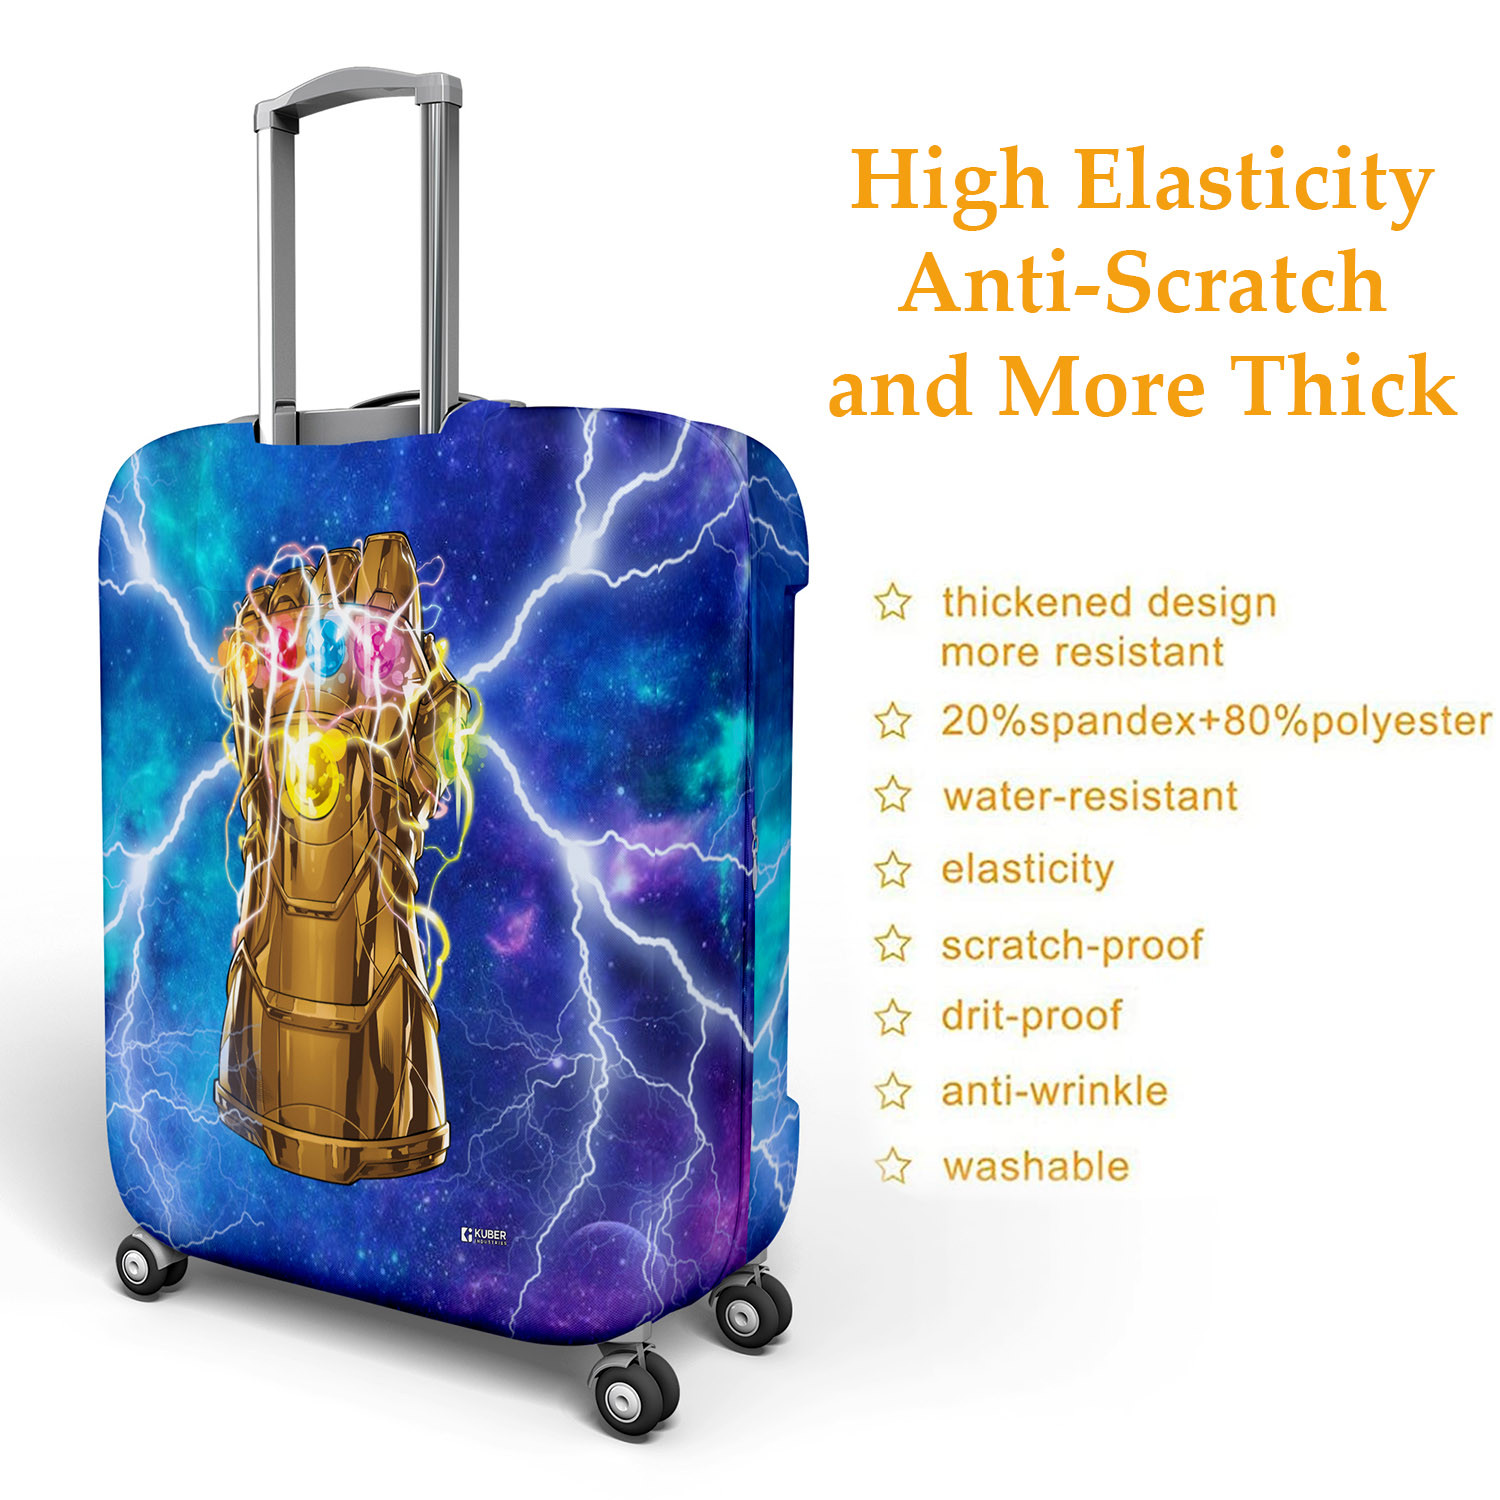 Kuber Industries Marvel The Infinity Gauntlet Luggage Cover|Polyester Travel Suitcase Cover|Washable|Stretchable Suitcase Cover|18-22 Inch-Small|26-30 Inch-Large|Pack of 2 (Sky Blue)